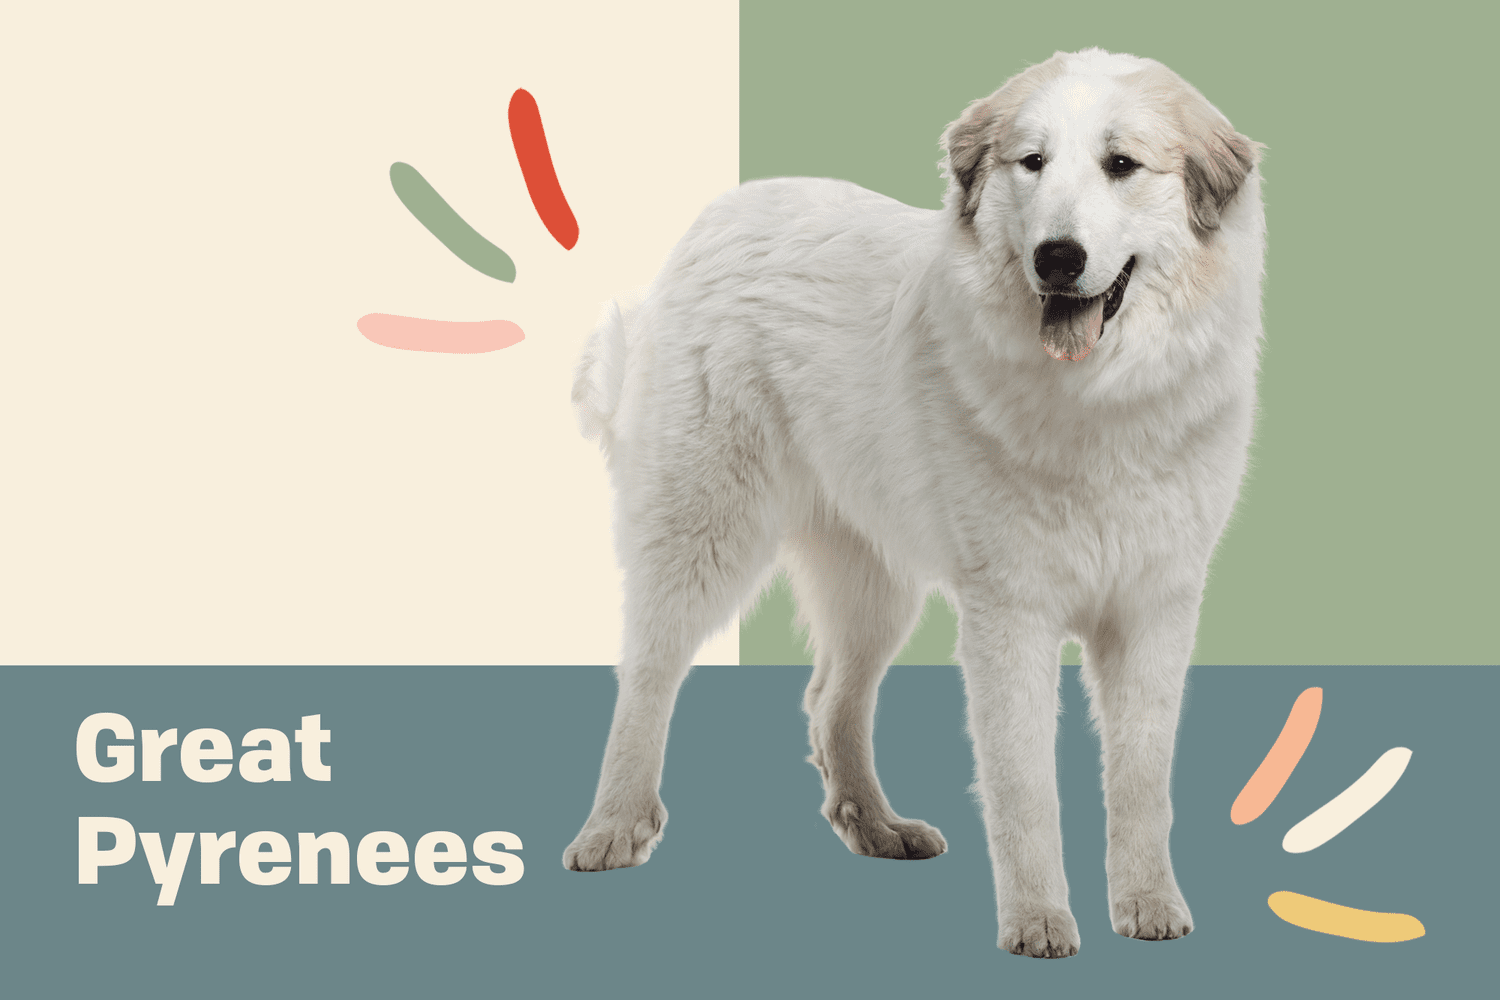 Great Pyrenees Dog Breed Information & Characteristics | Daily Paws